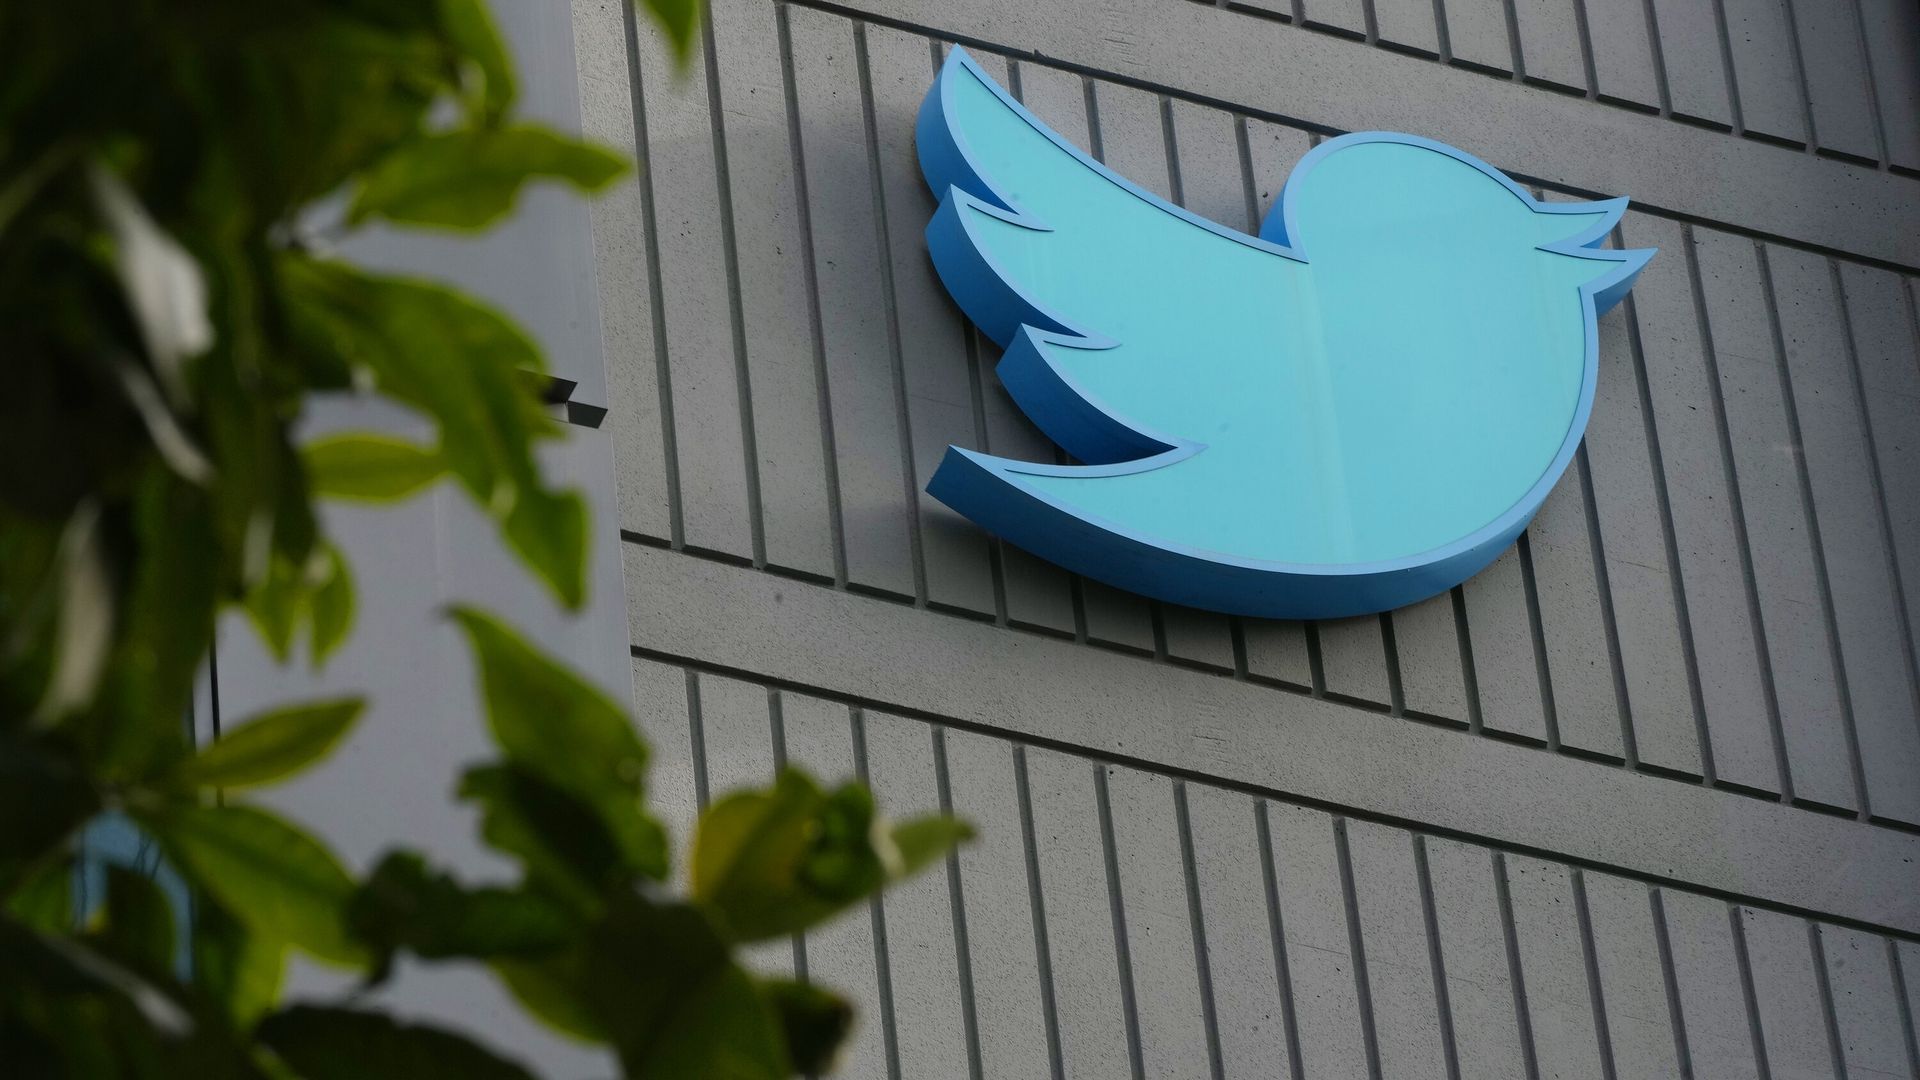 Twitter 2.0: X Corp takes the wheel in platform's next chapter